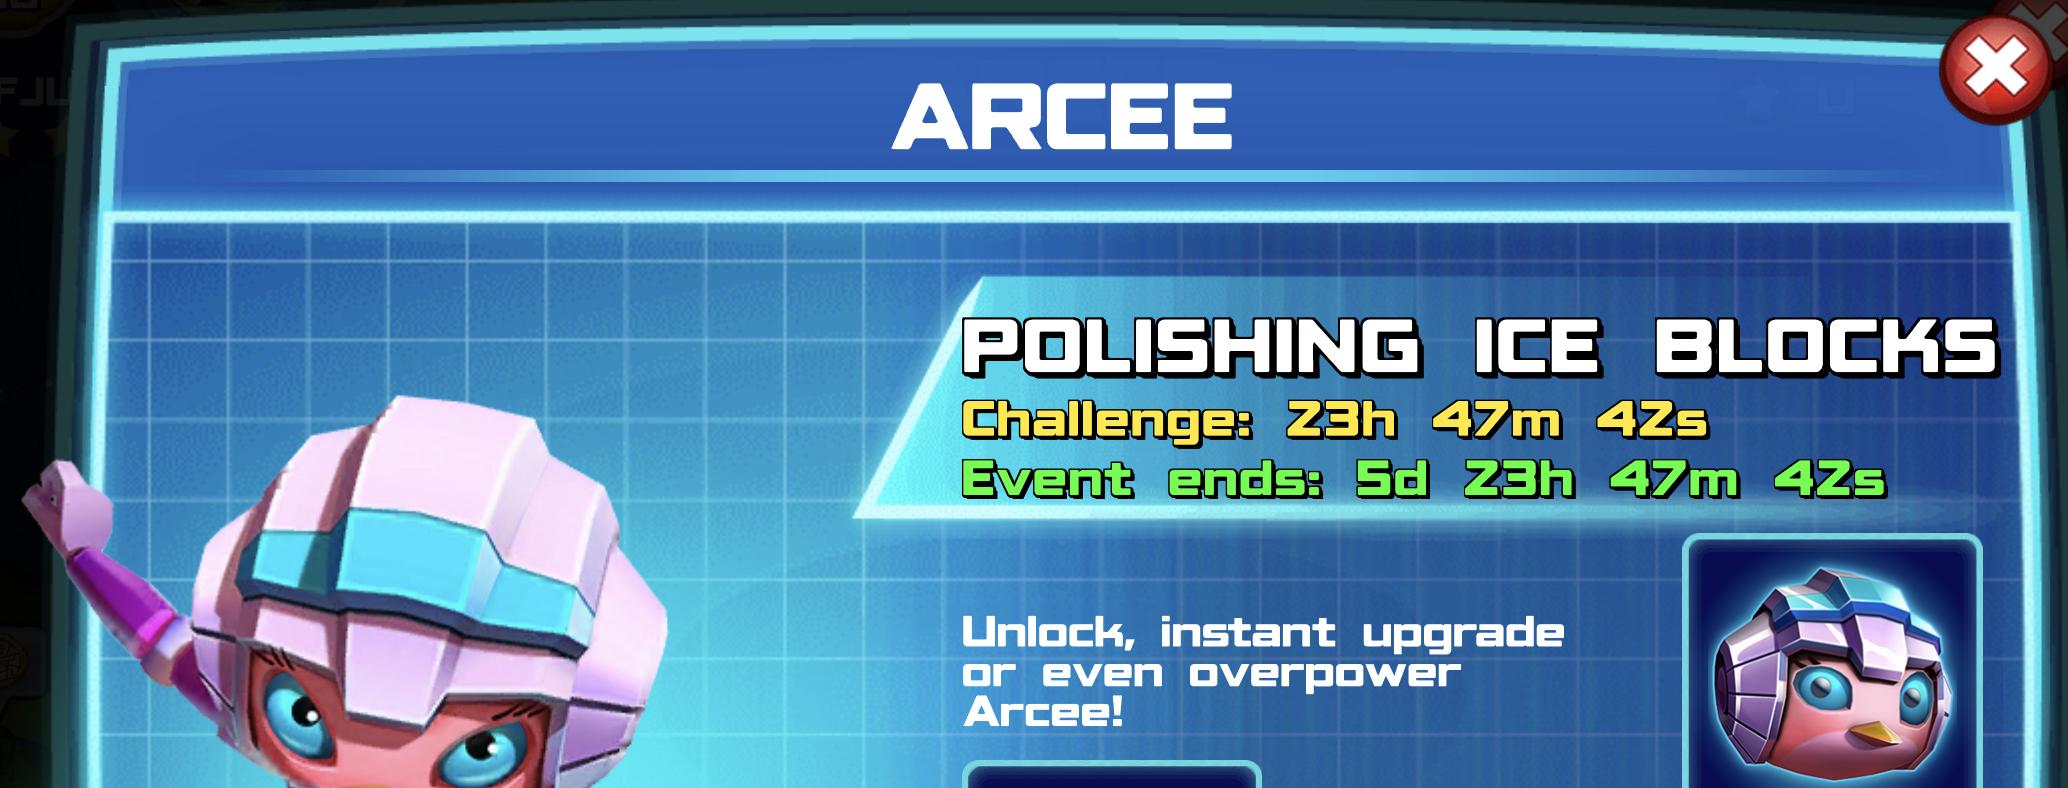 The event banner for Arcee